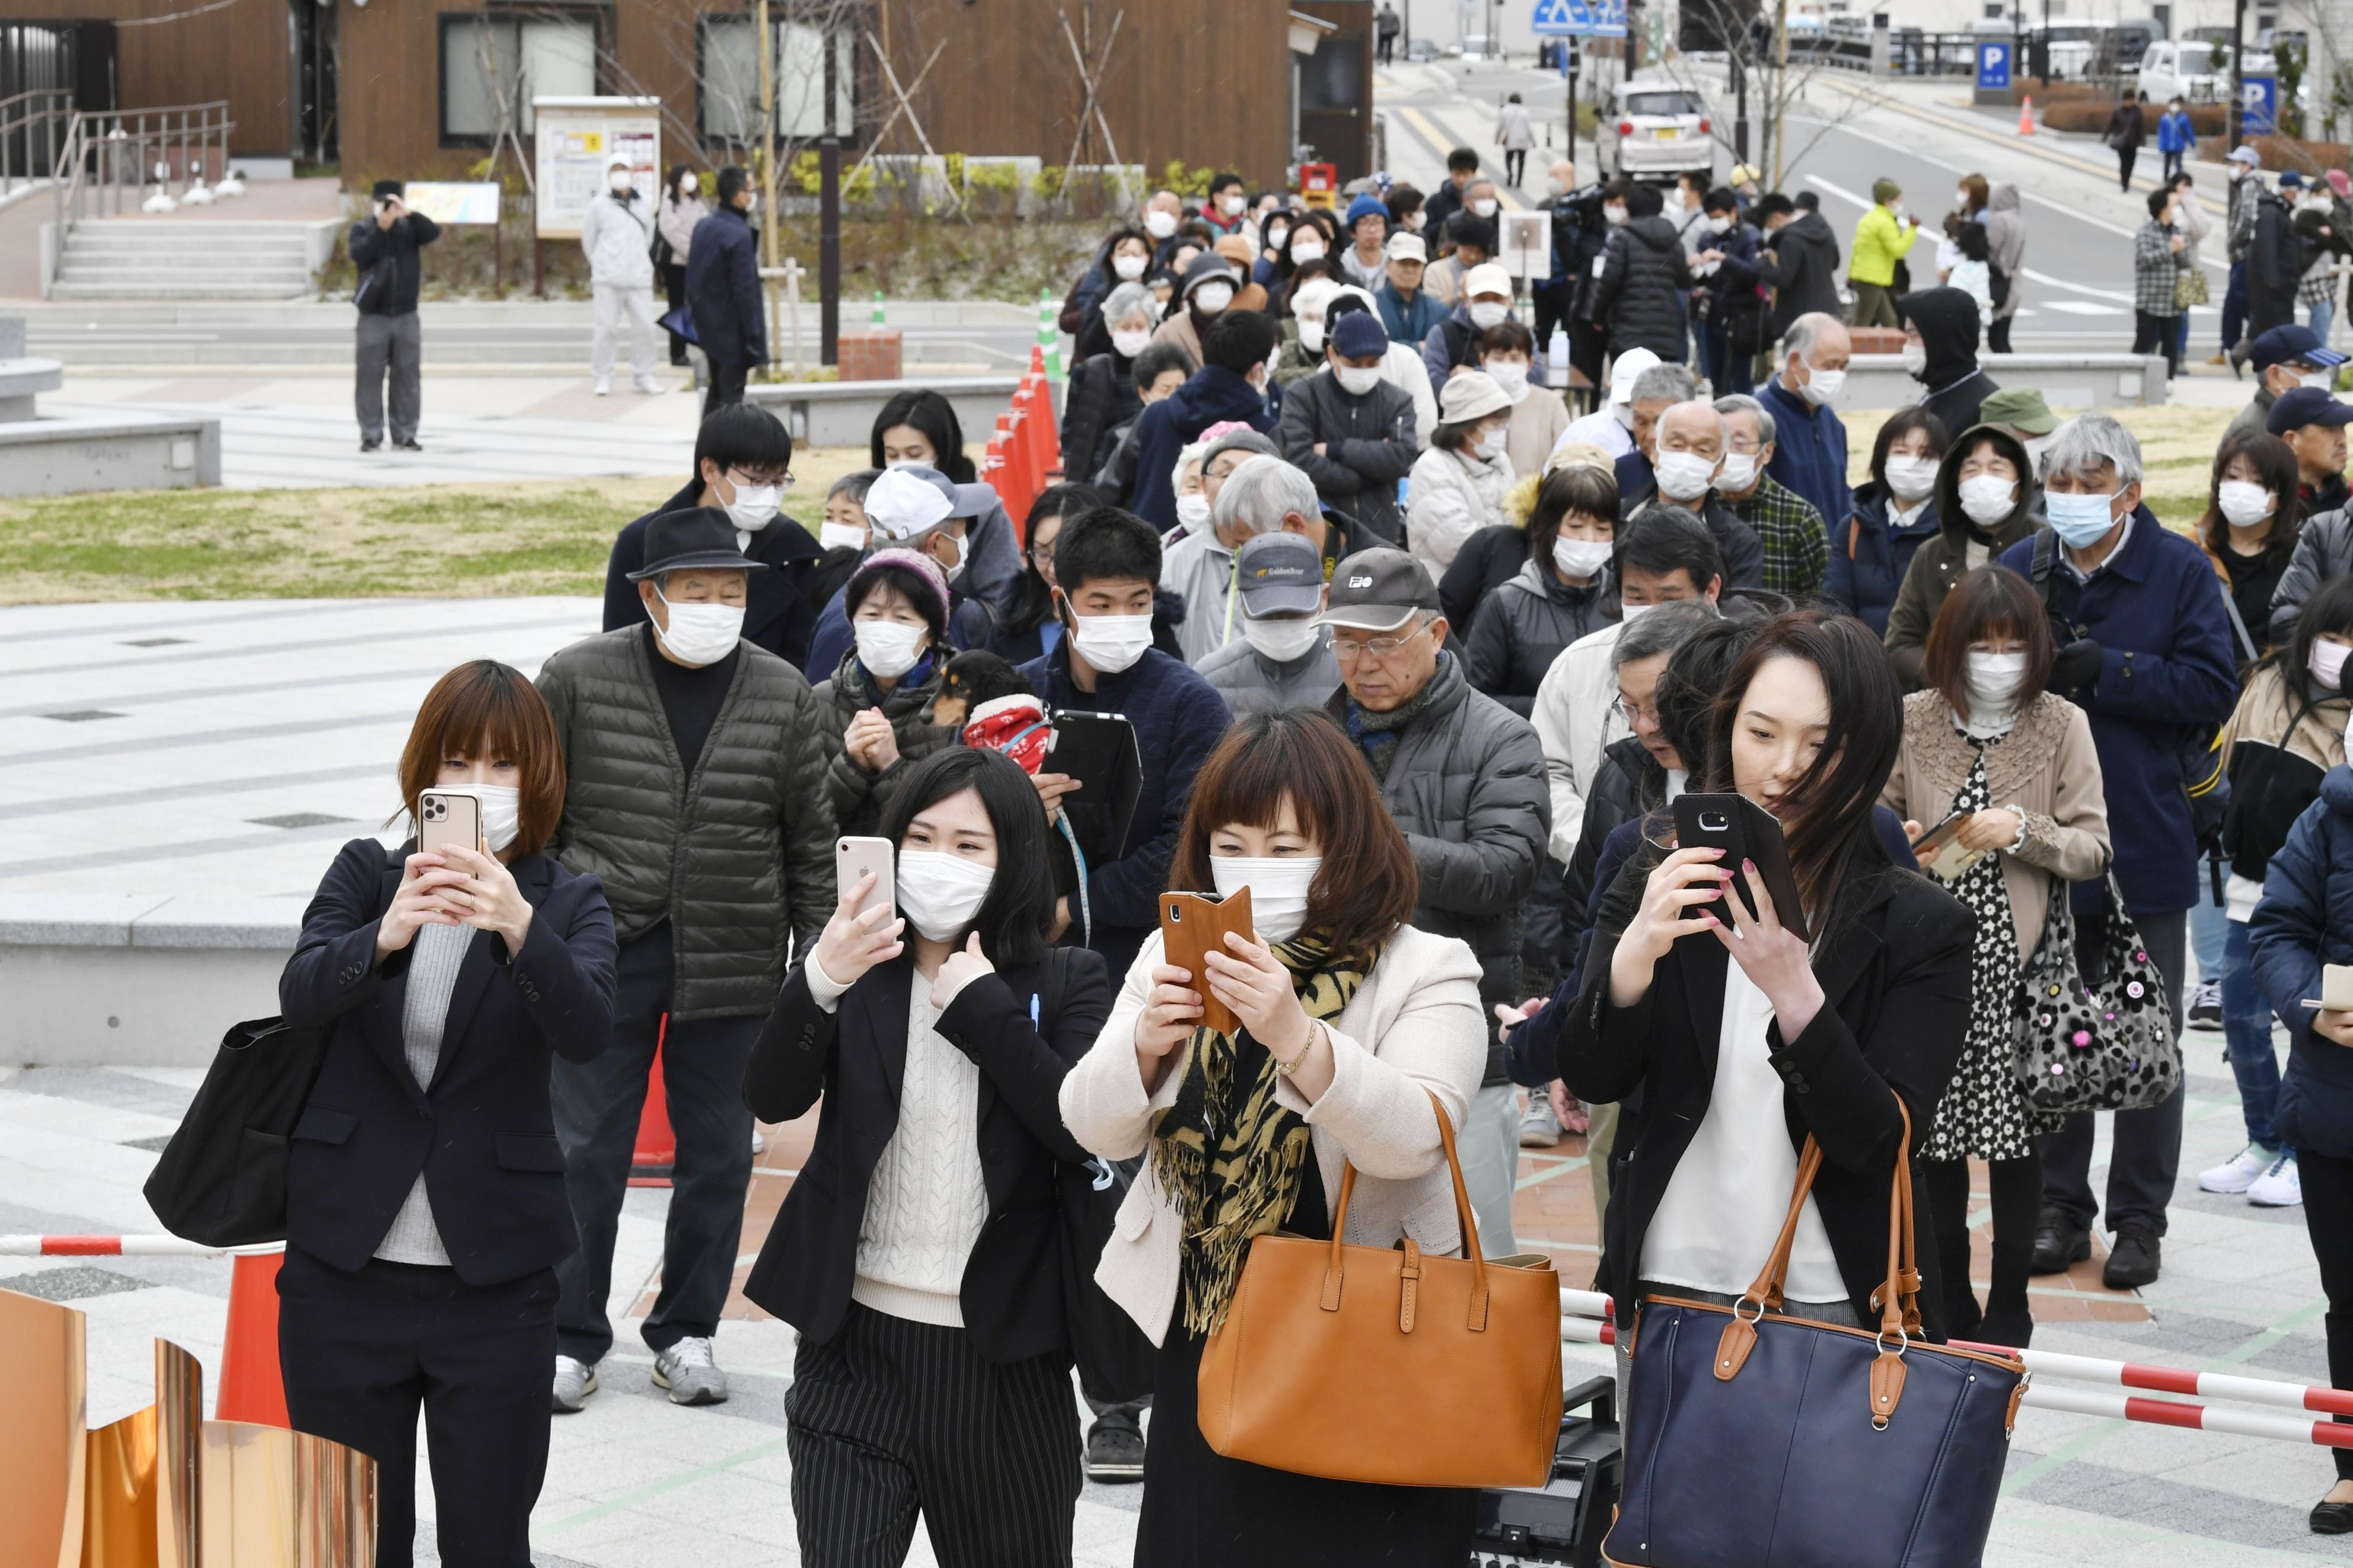 People visit to see the flame for this year’s Tokyo Olympics exhibited in Ofunato, Iwate prefecture, on Monday. Japan is under increasing pressuring to postpone the Olympic Games because of the Covid-19 pandemic. Photo: Kyodo